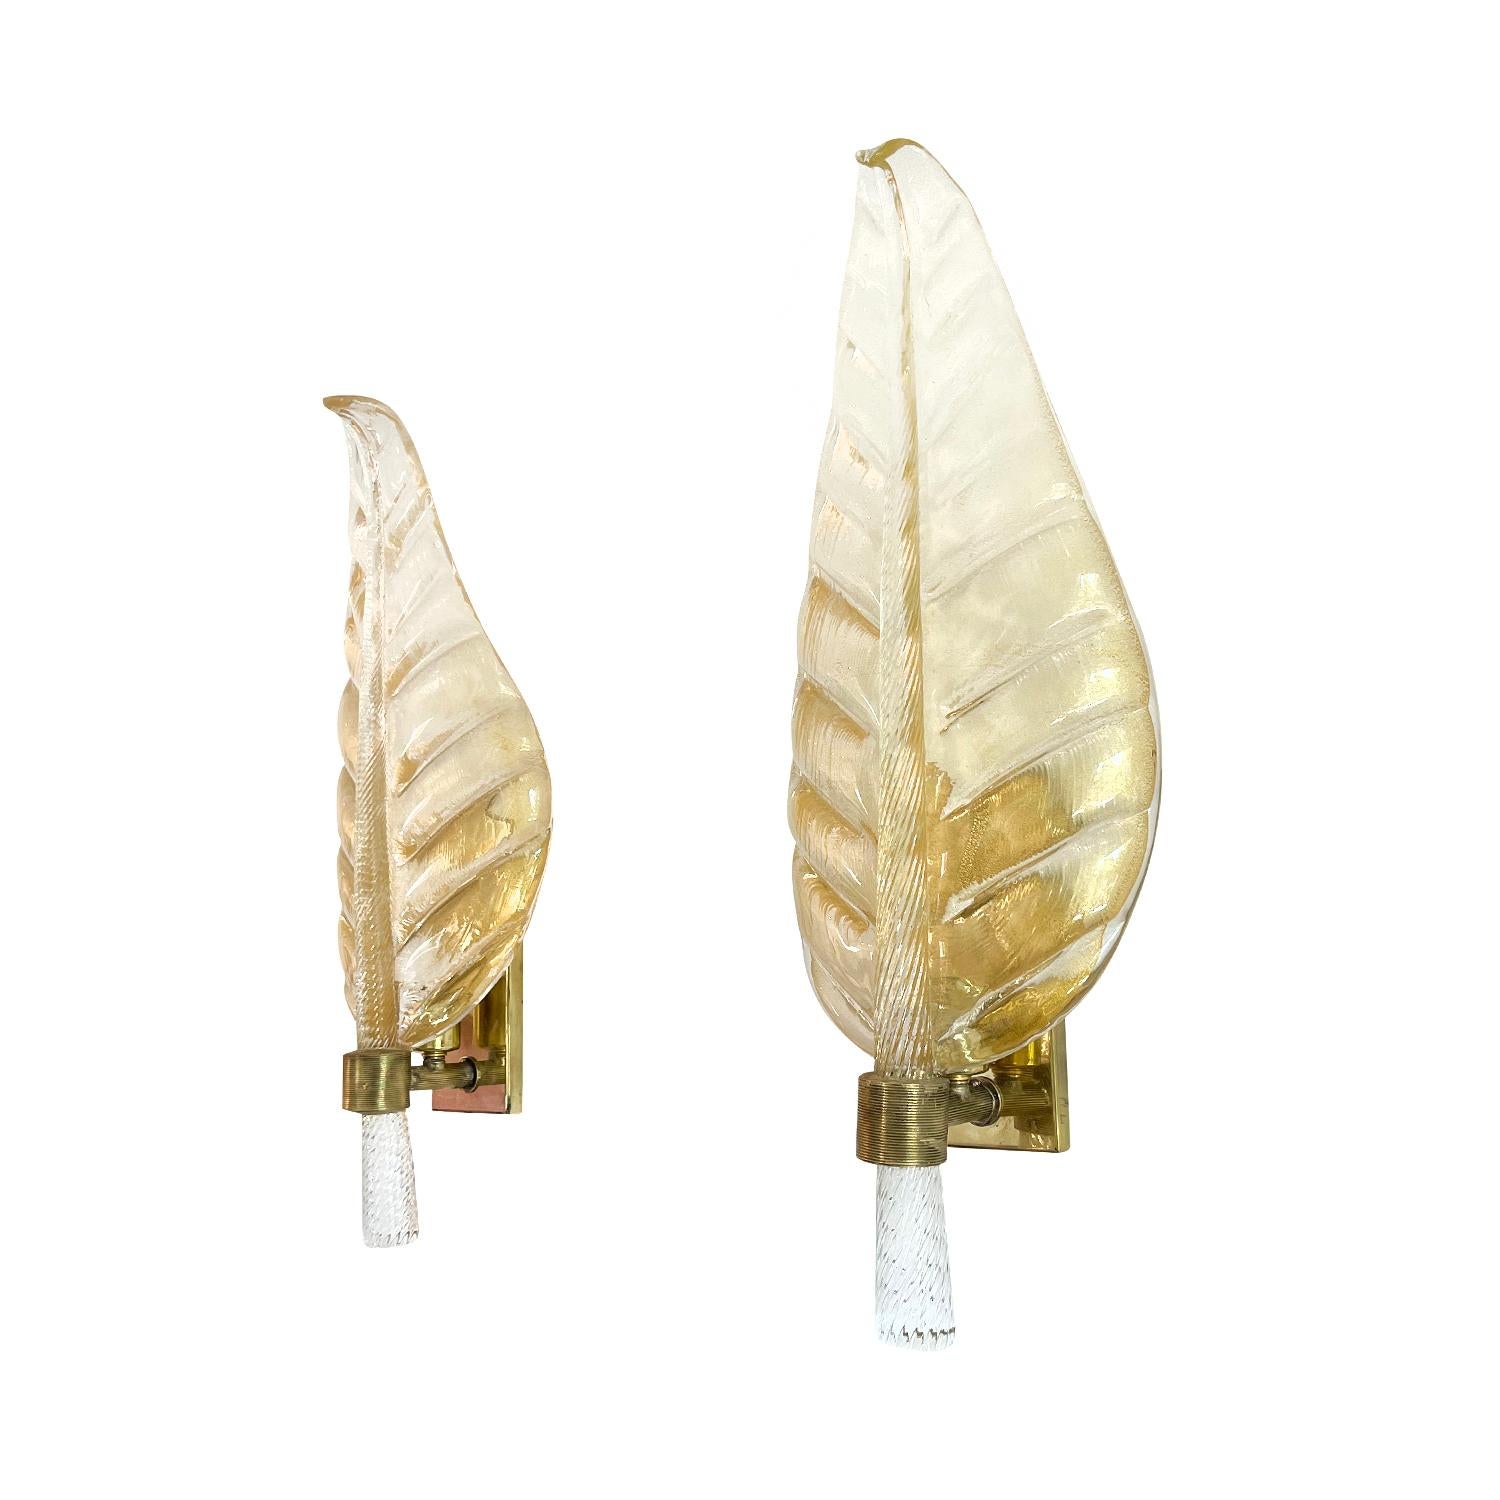 Hand-Crafted 20th Century Italian Pair of Murano Glass Oro Sommerso, Brass Leaf Wall Sconces